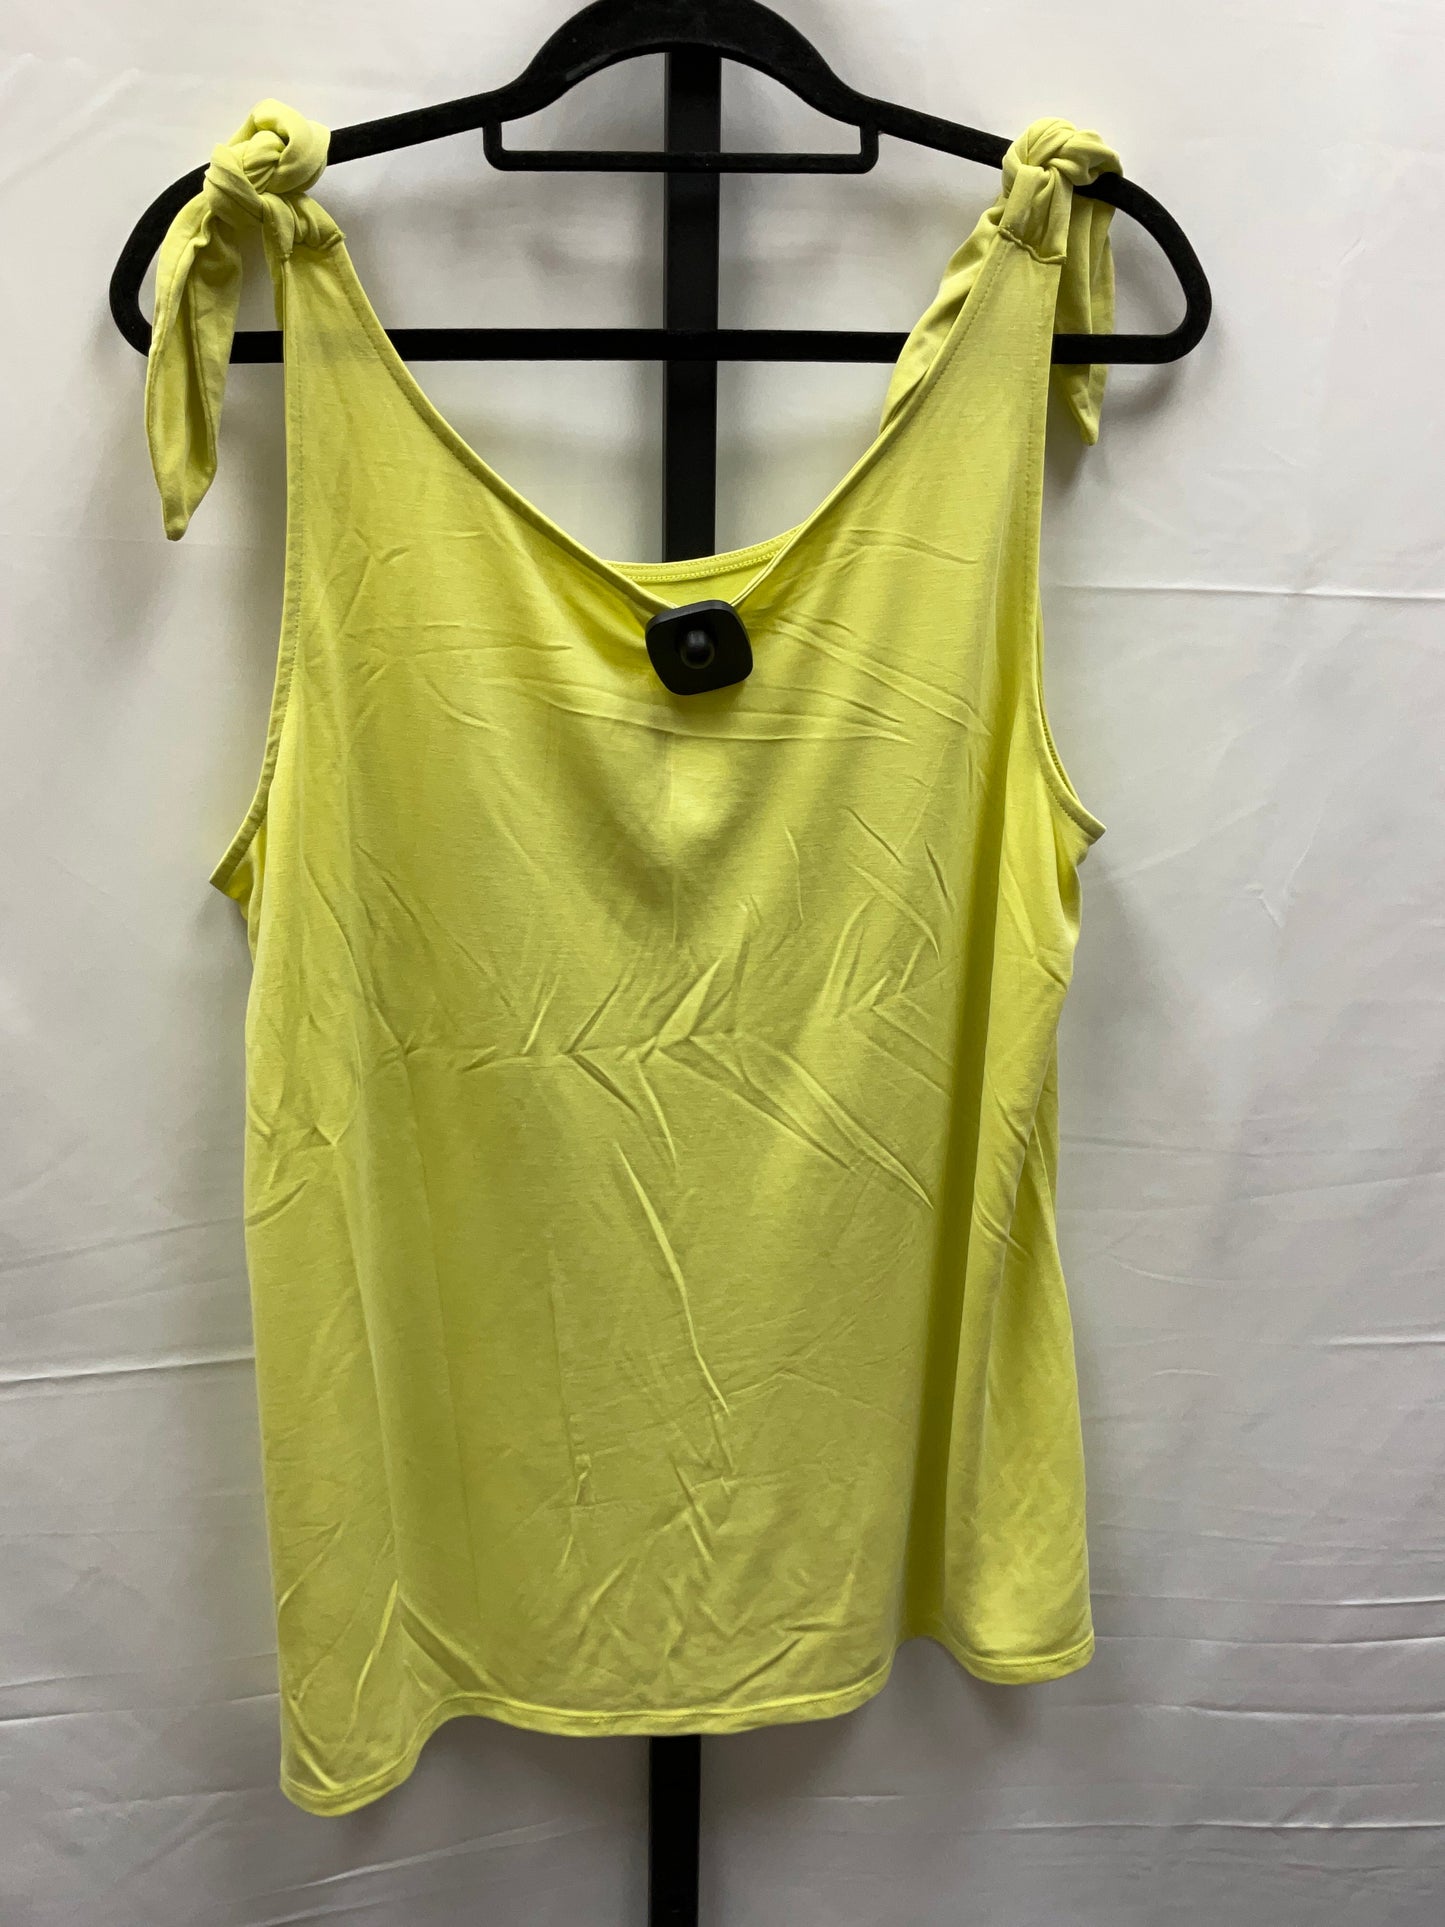 Yellow Top Sleeveless Time And Tru, Size Xl